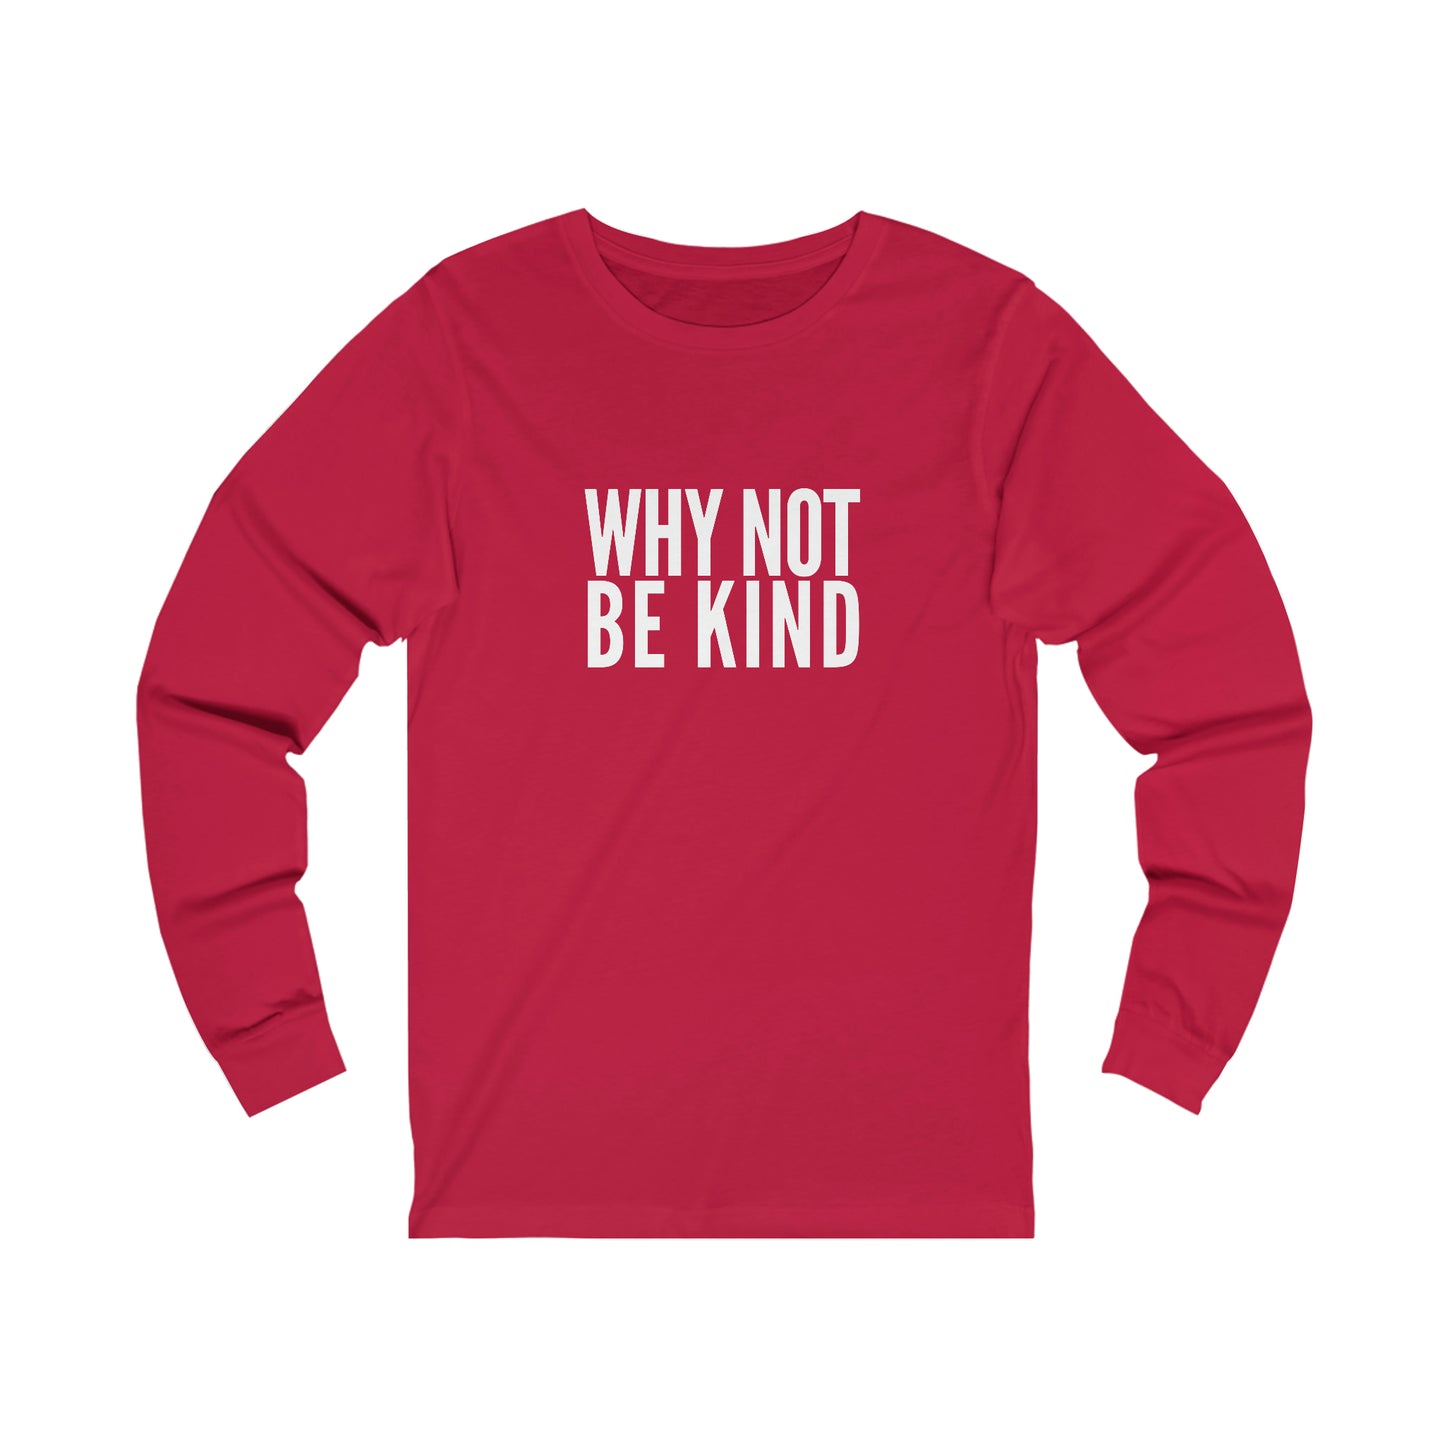 Why Not Be Kind Unisex Jersey Long Sleeve Tee